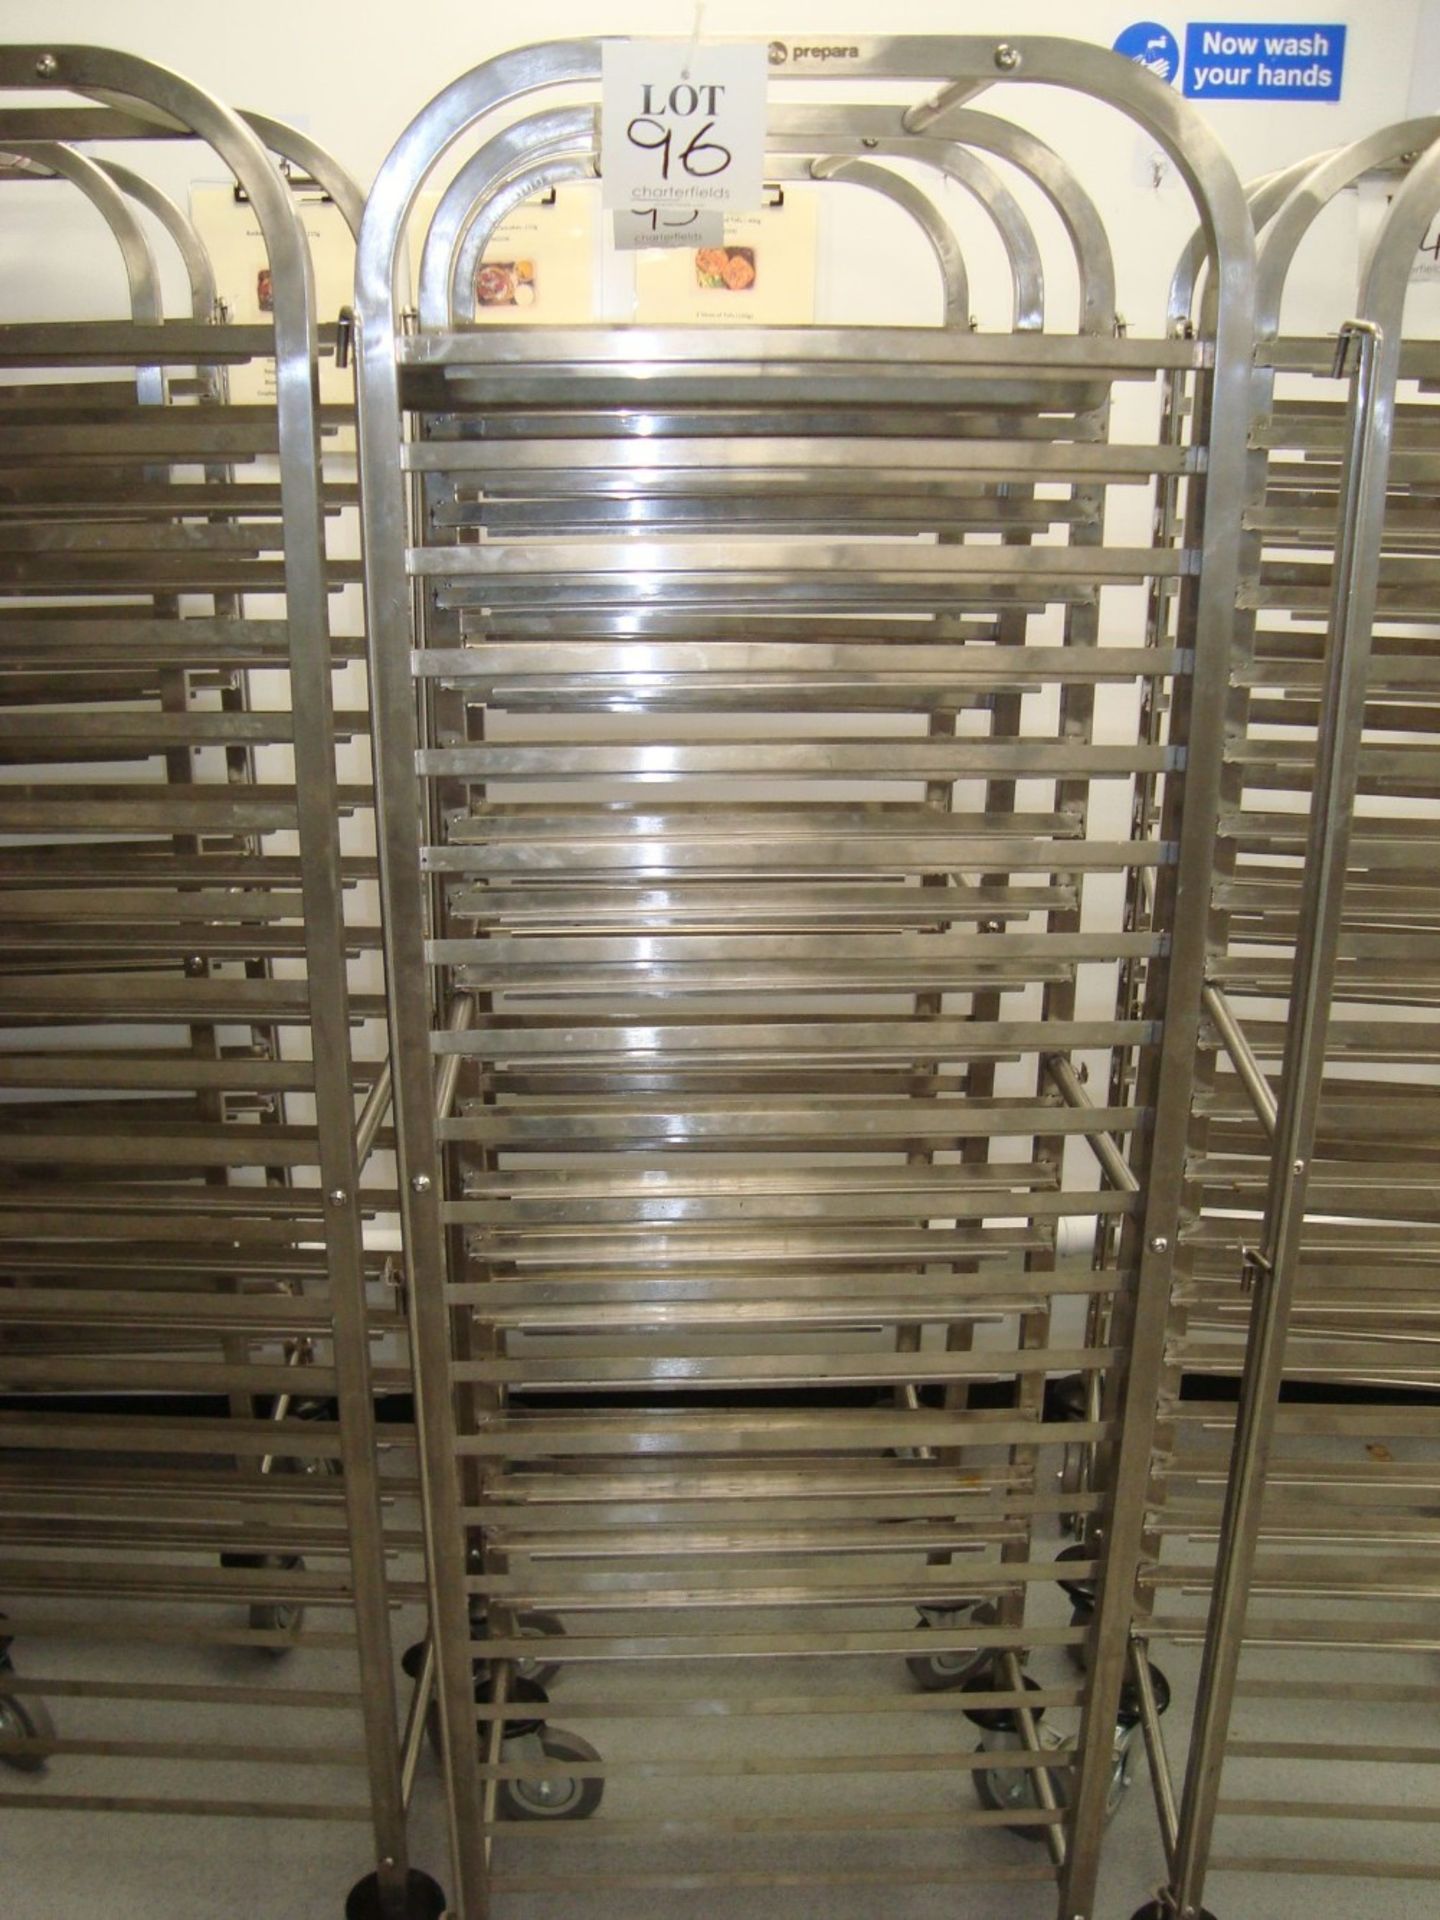 A Prepara stainless steel full height mobile tray rack